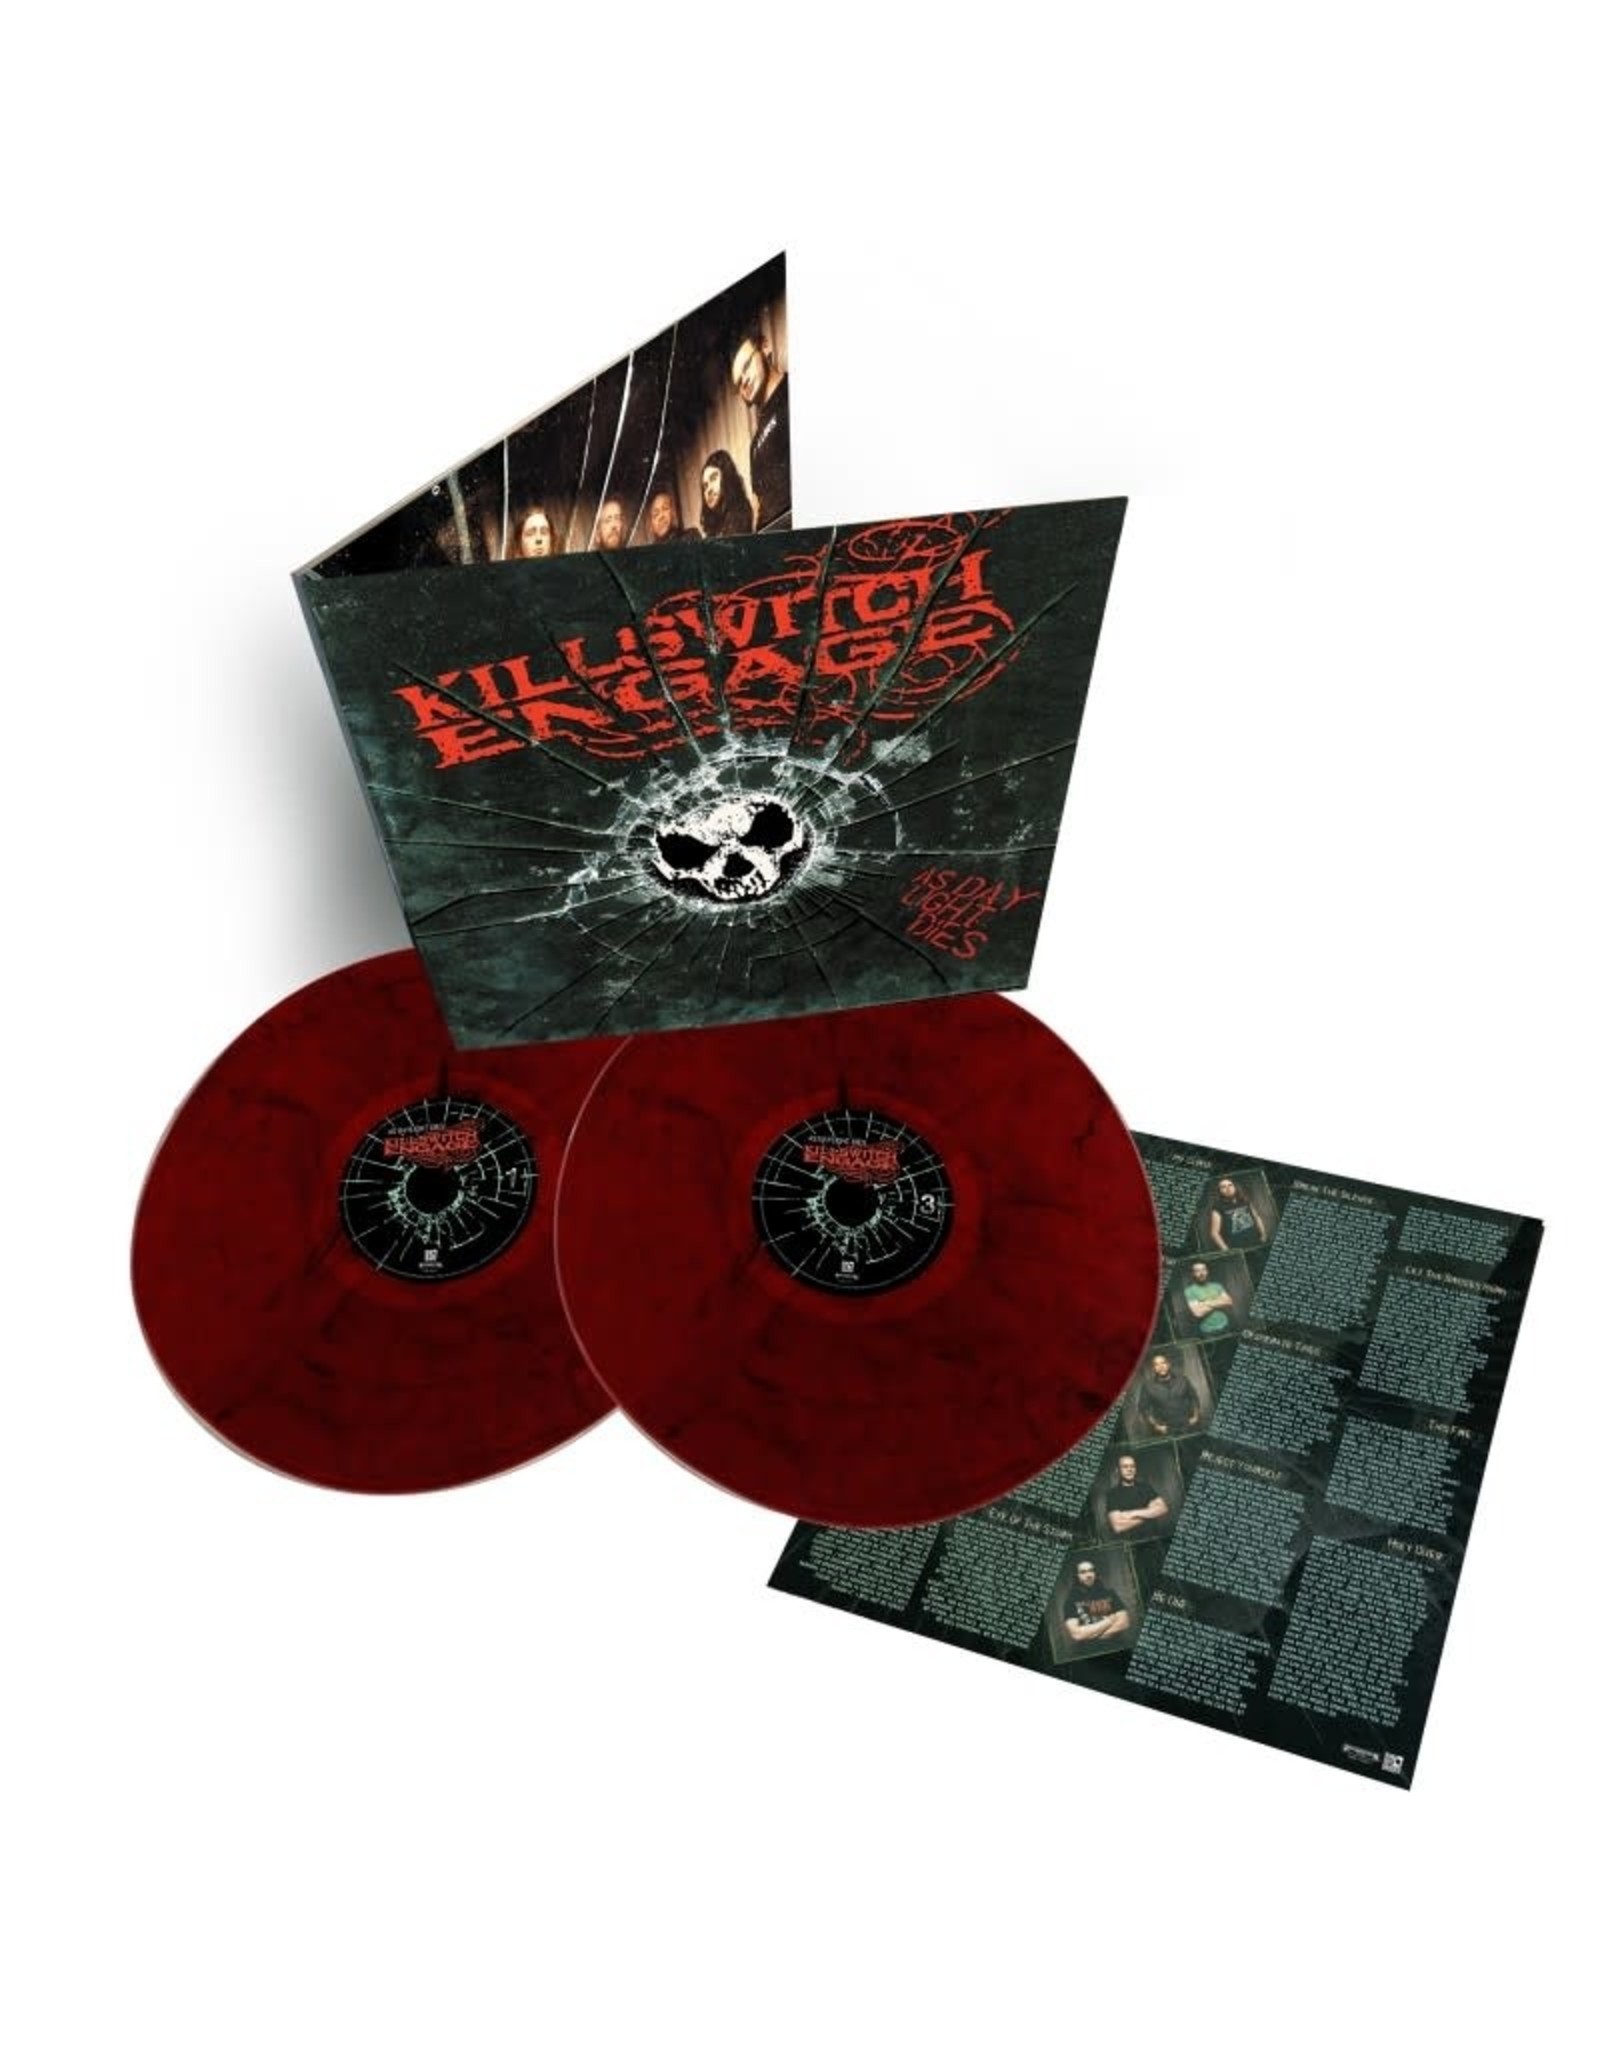 Killswitch Engage - As Daylight Dies (Red & Black Vinyl)